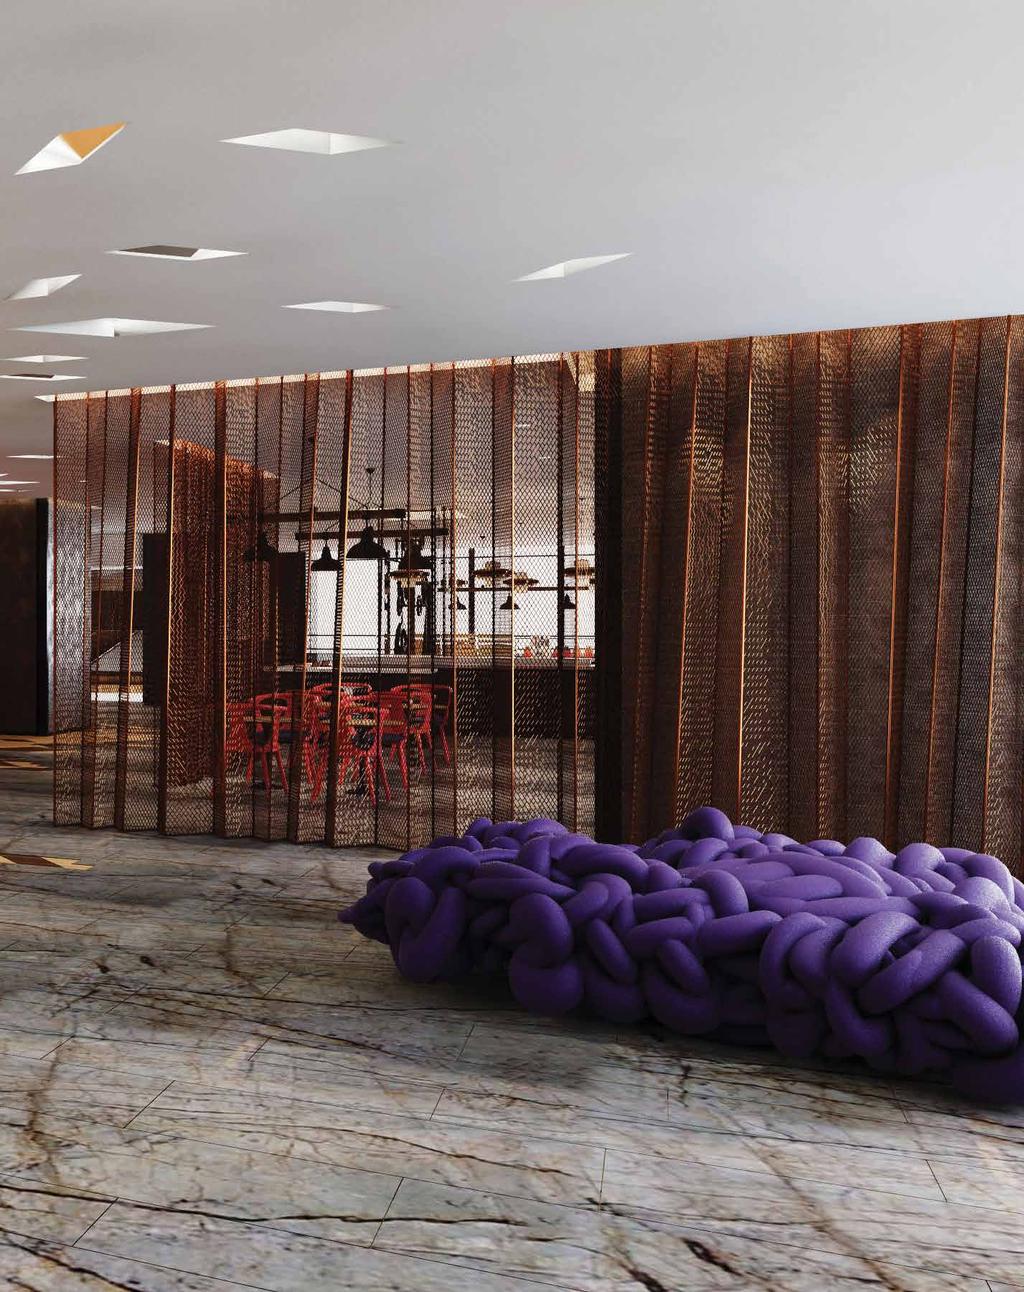 INDIGO HOTEL KAOHSIUNG CENTRAL PARK This project aims to redefine the whole idea of a fivestar hotel experience, shifting the notion of luxury as it is commonly known.